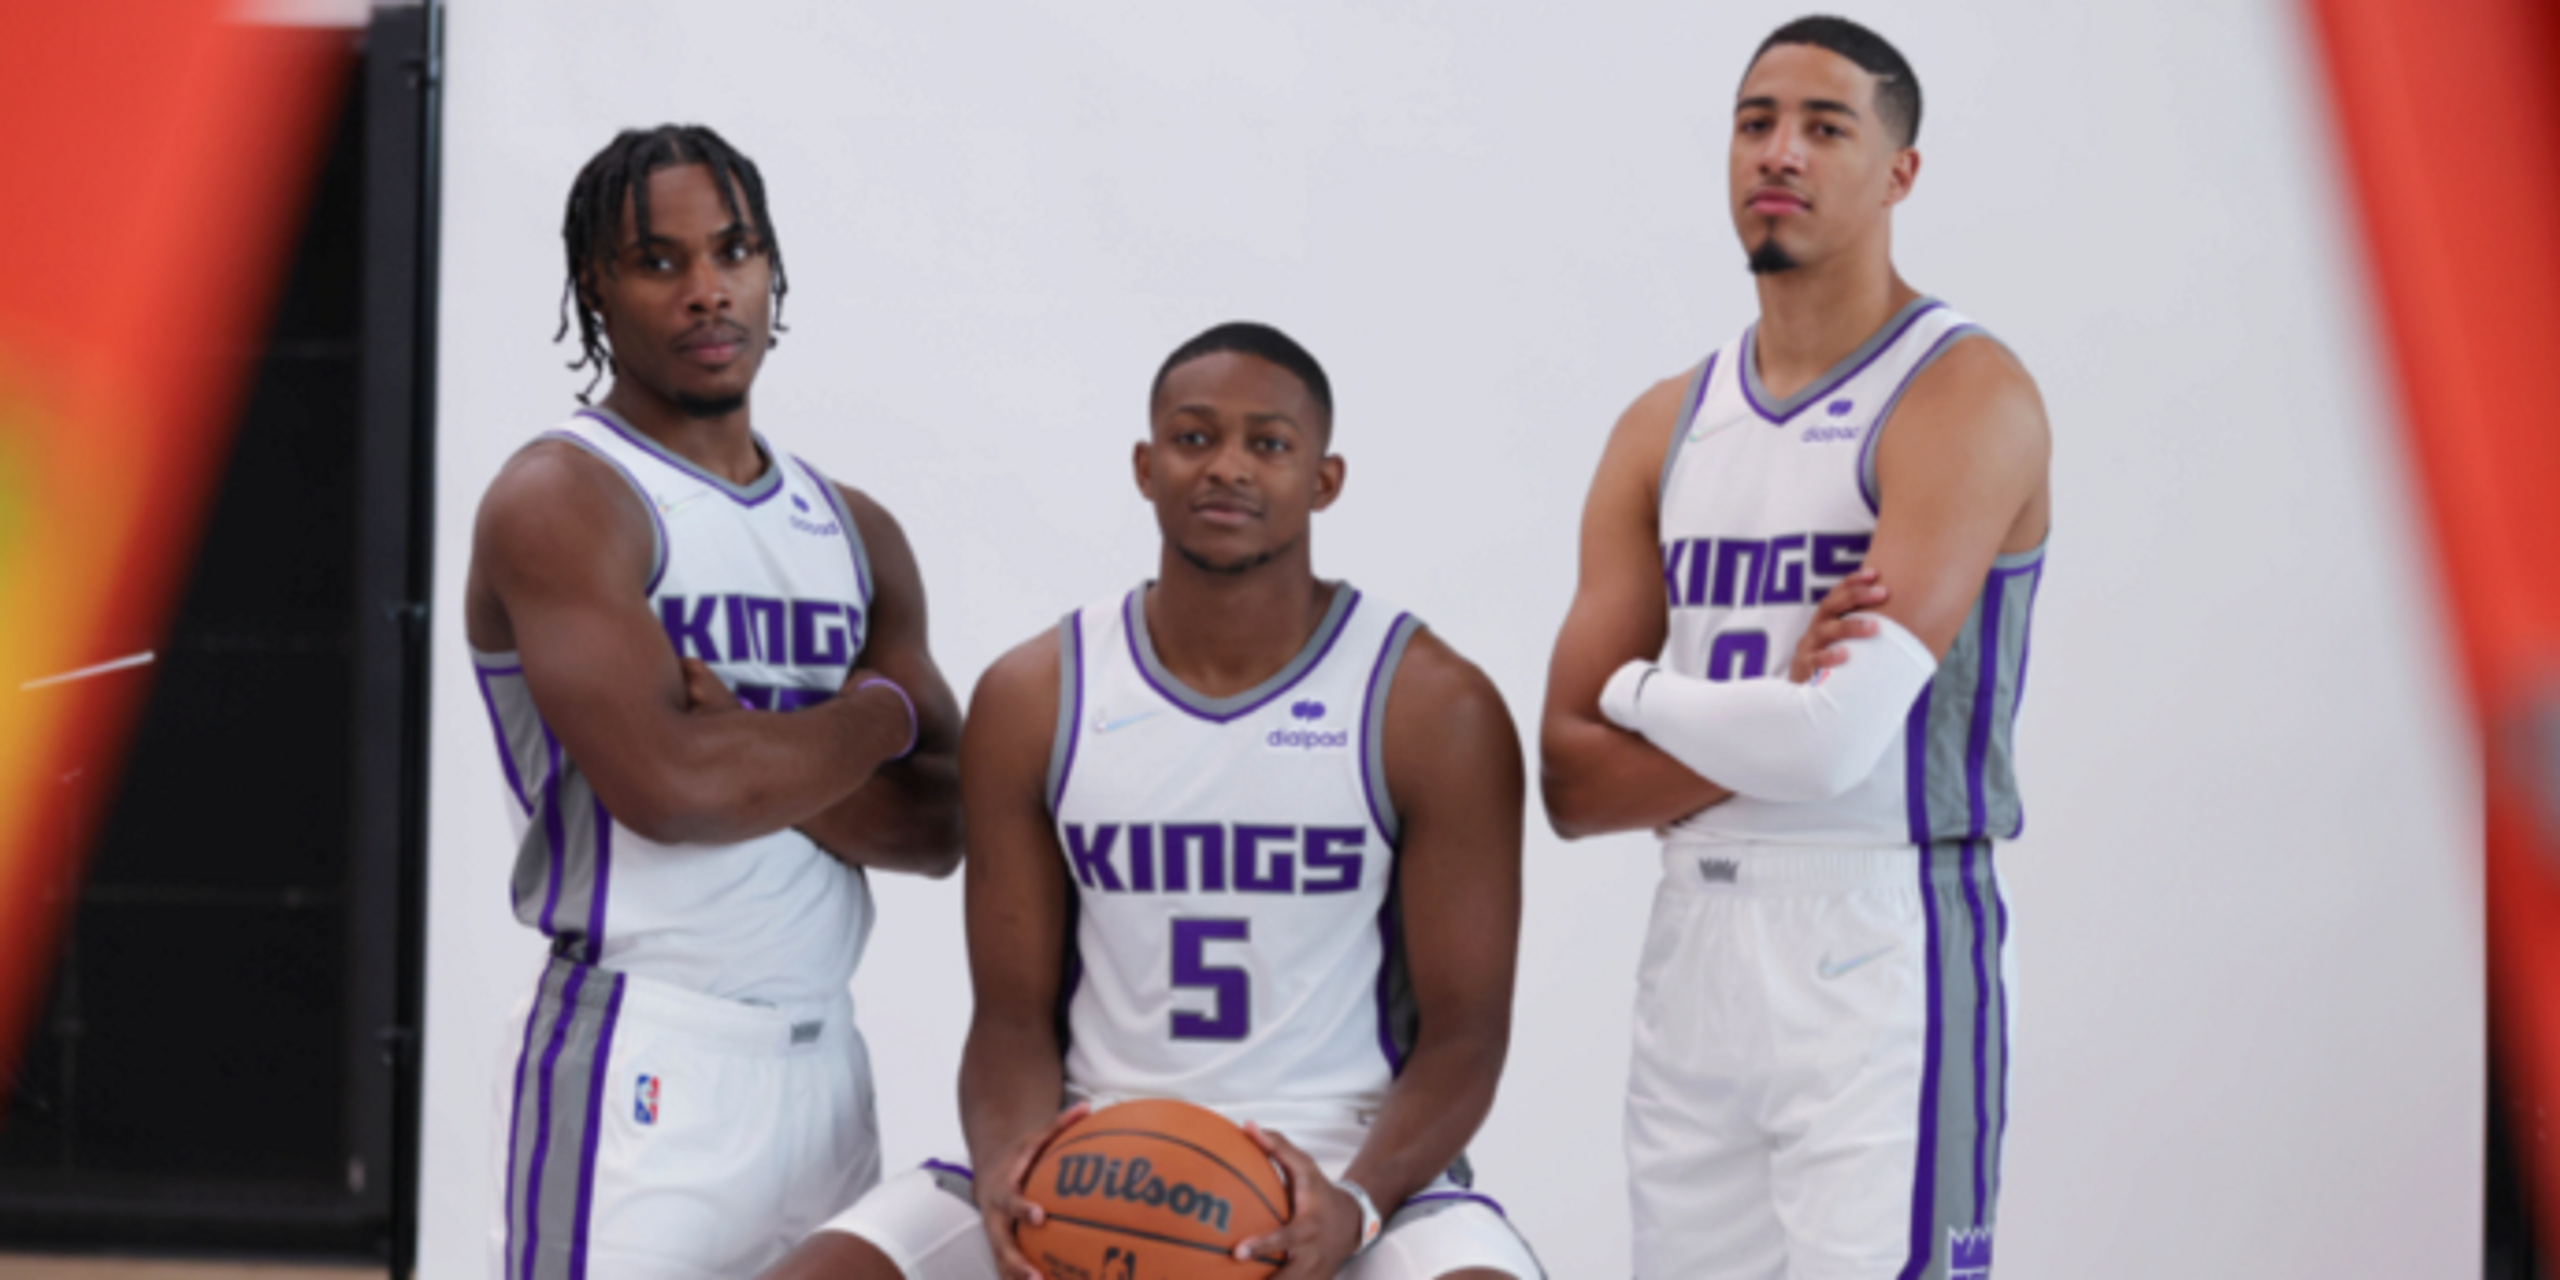 Kings enter season looking to end 15-year playoff drought